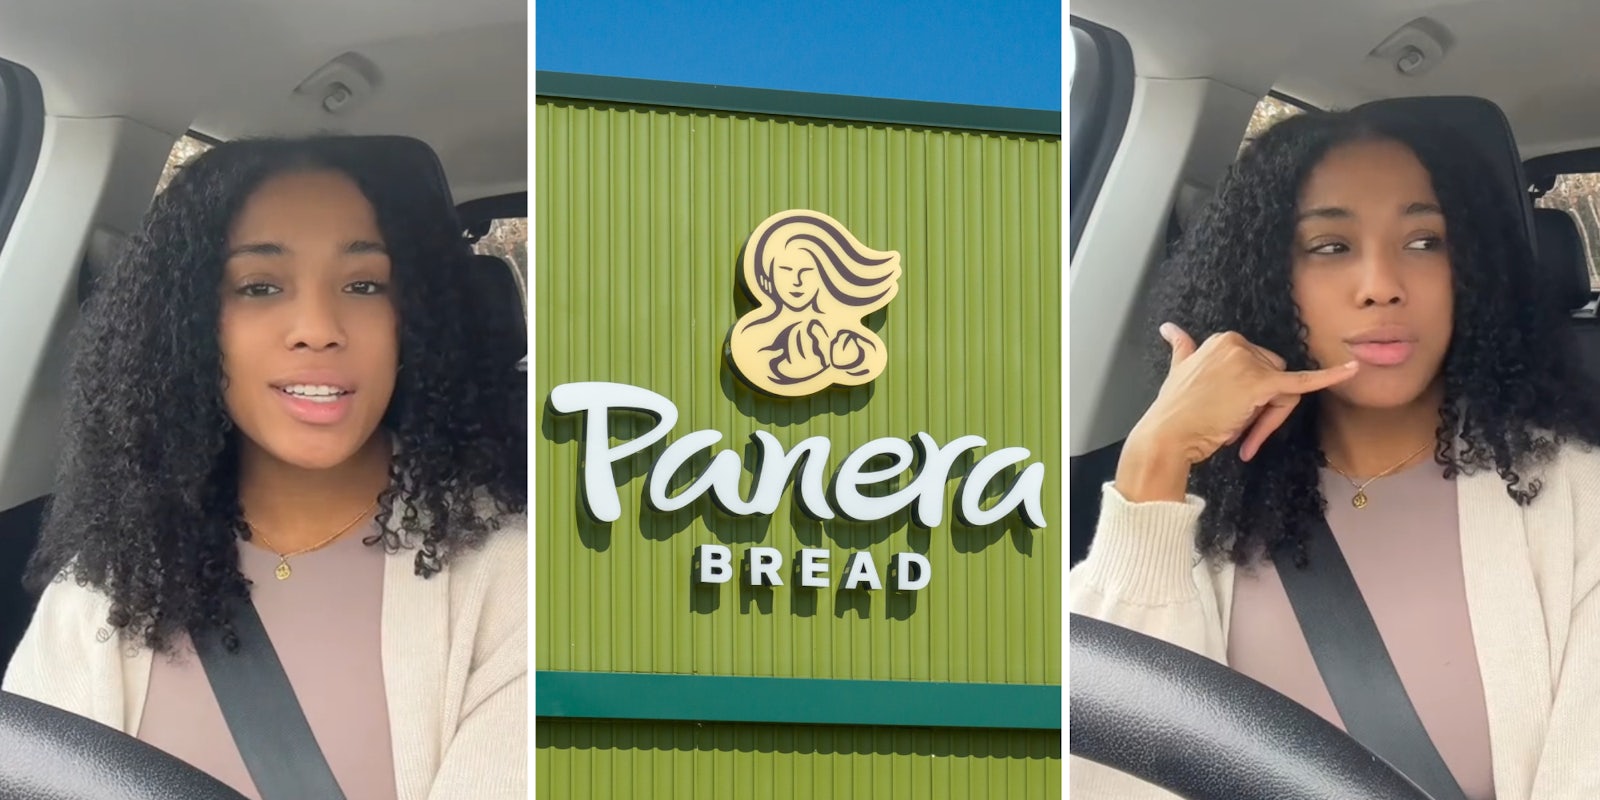 Panera customer told she can’t buy a Cinnamon Crunch bagel because they’re ‘sold out.’ There was a bag full of them for the workers to take home